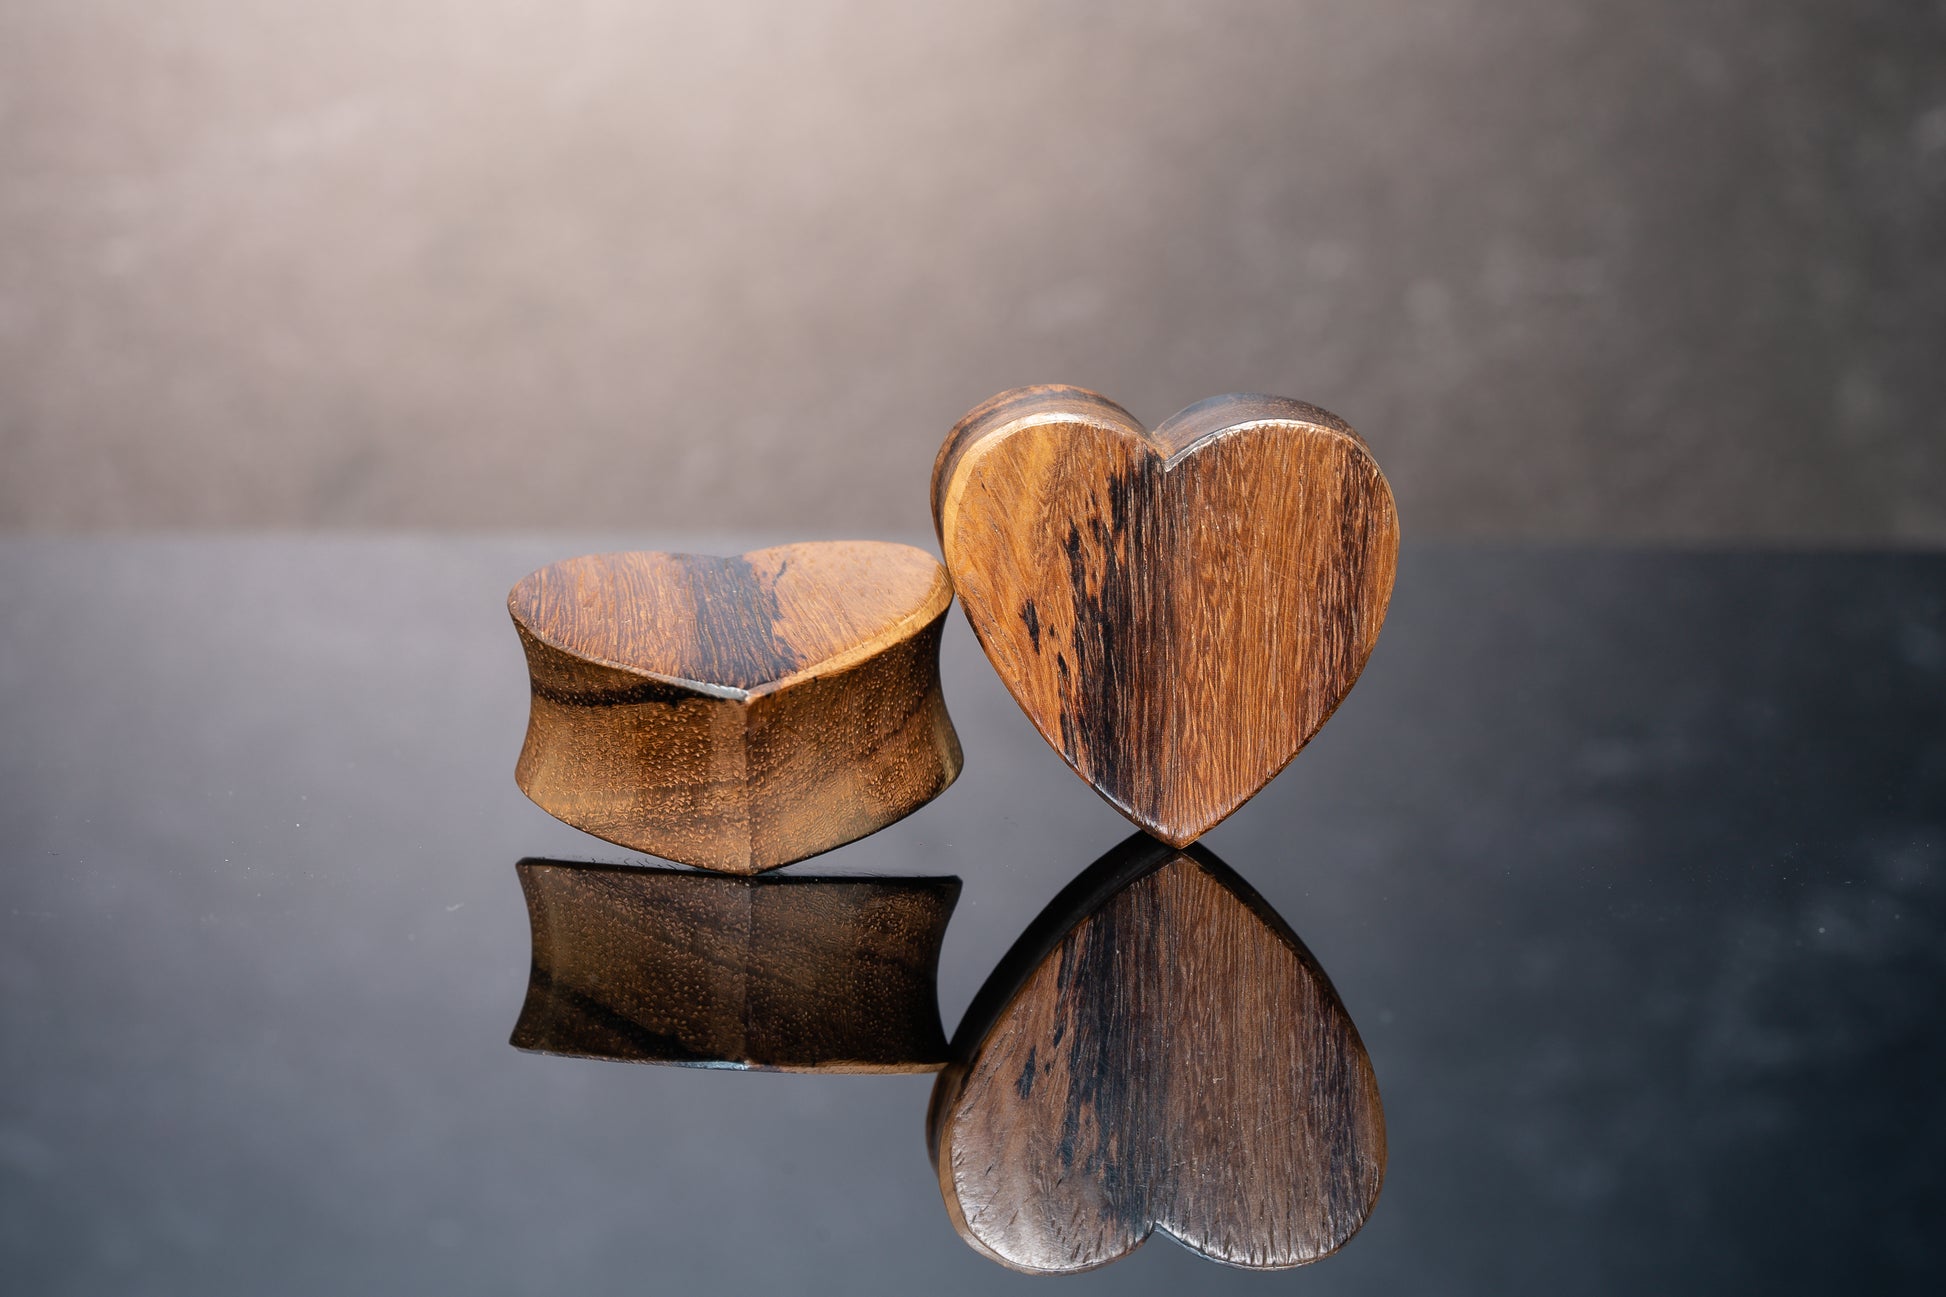 Wood Heart Plugs - Carved Heart Gauges (Pair) - PA43 13mm - 1/2